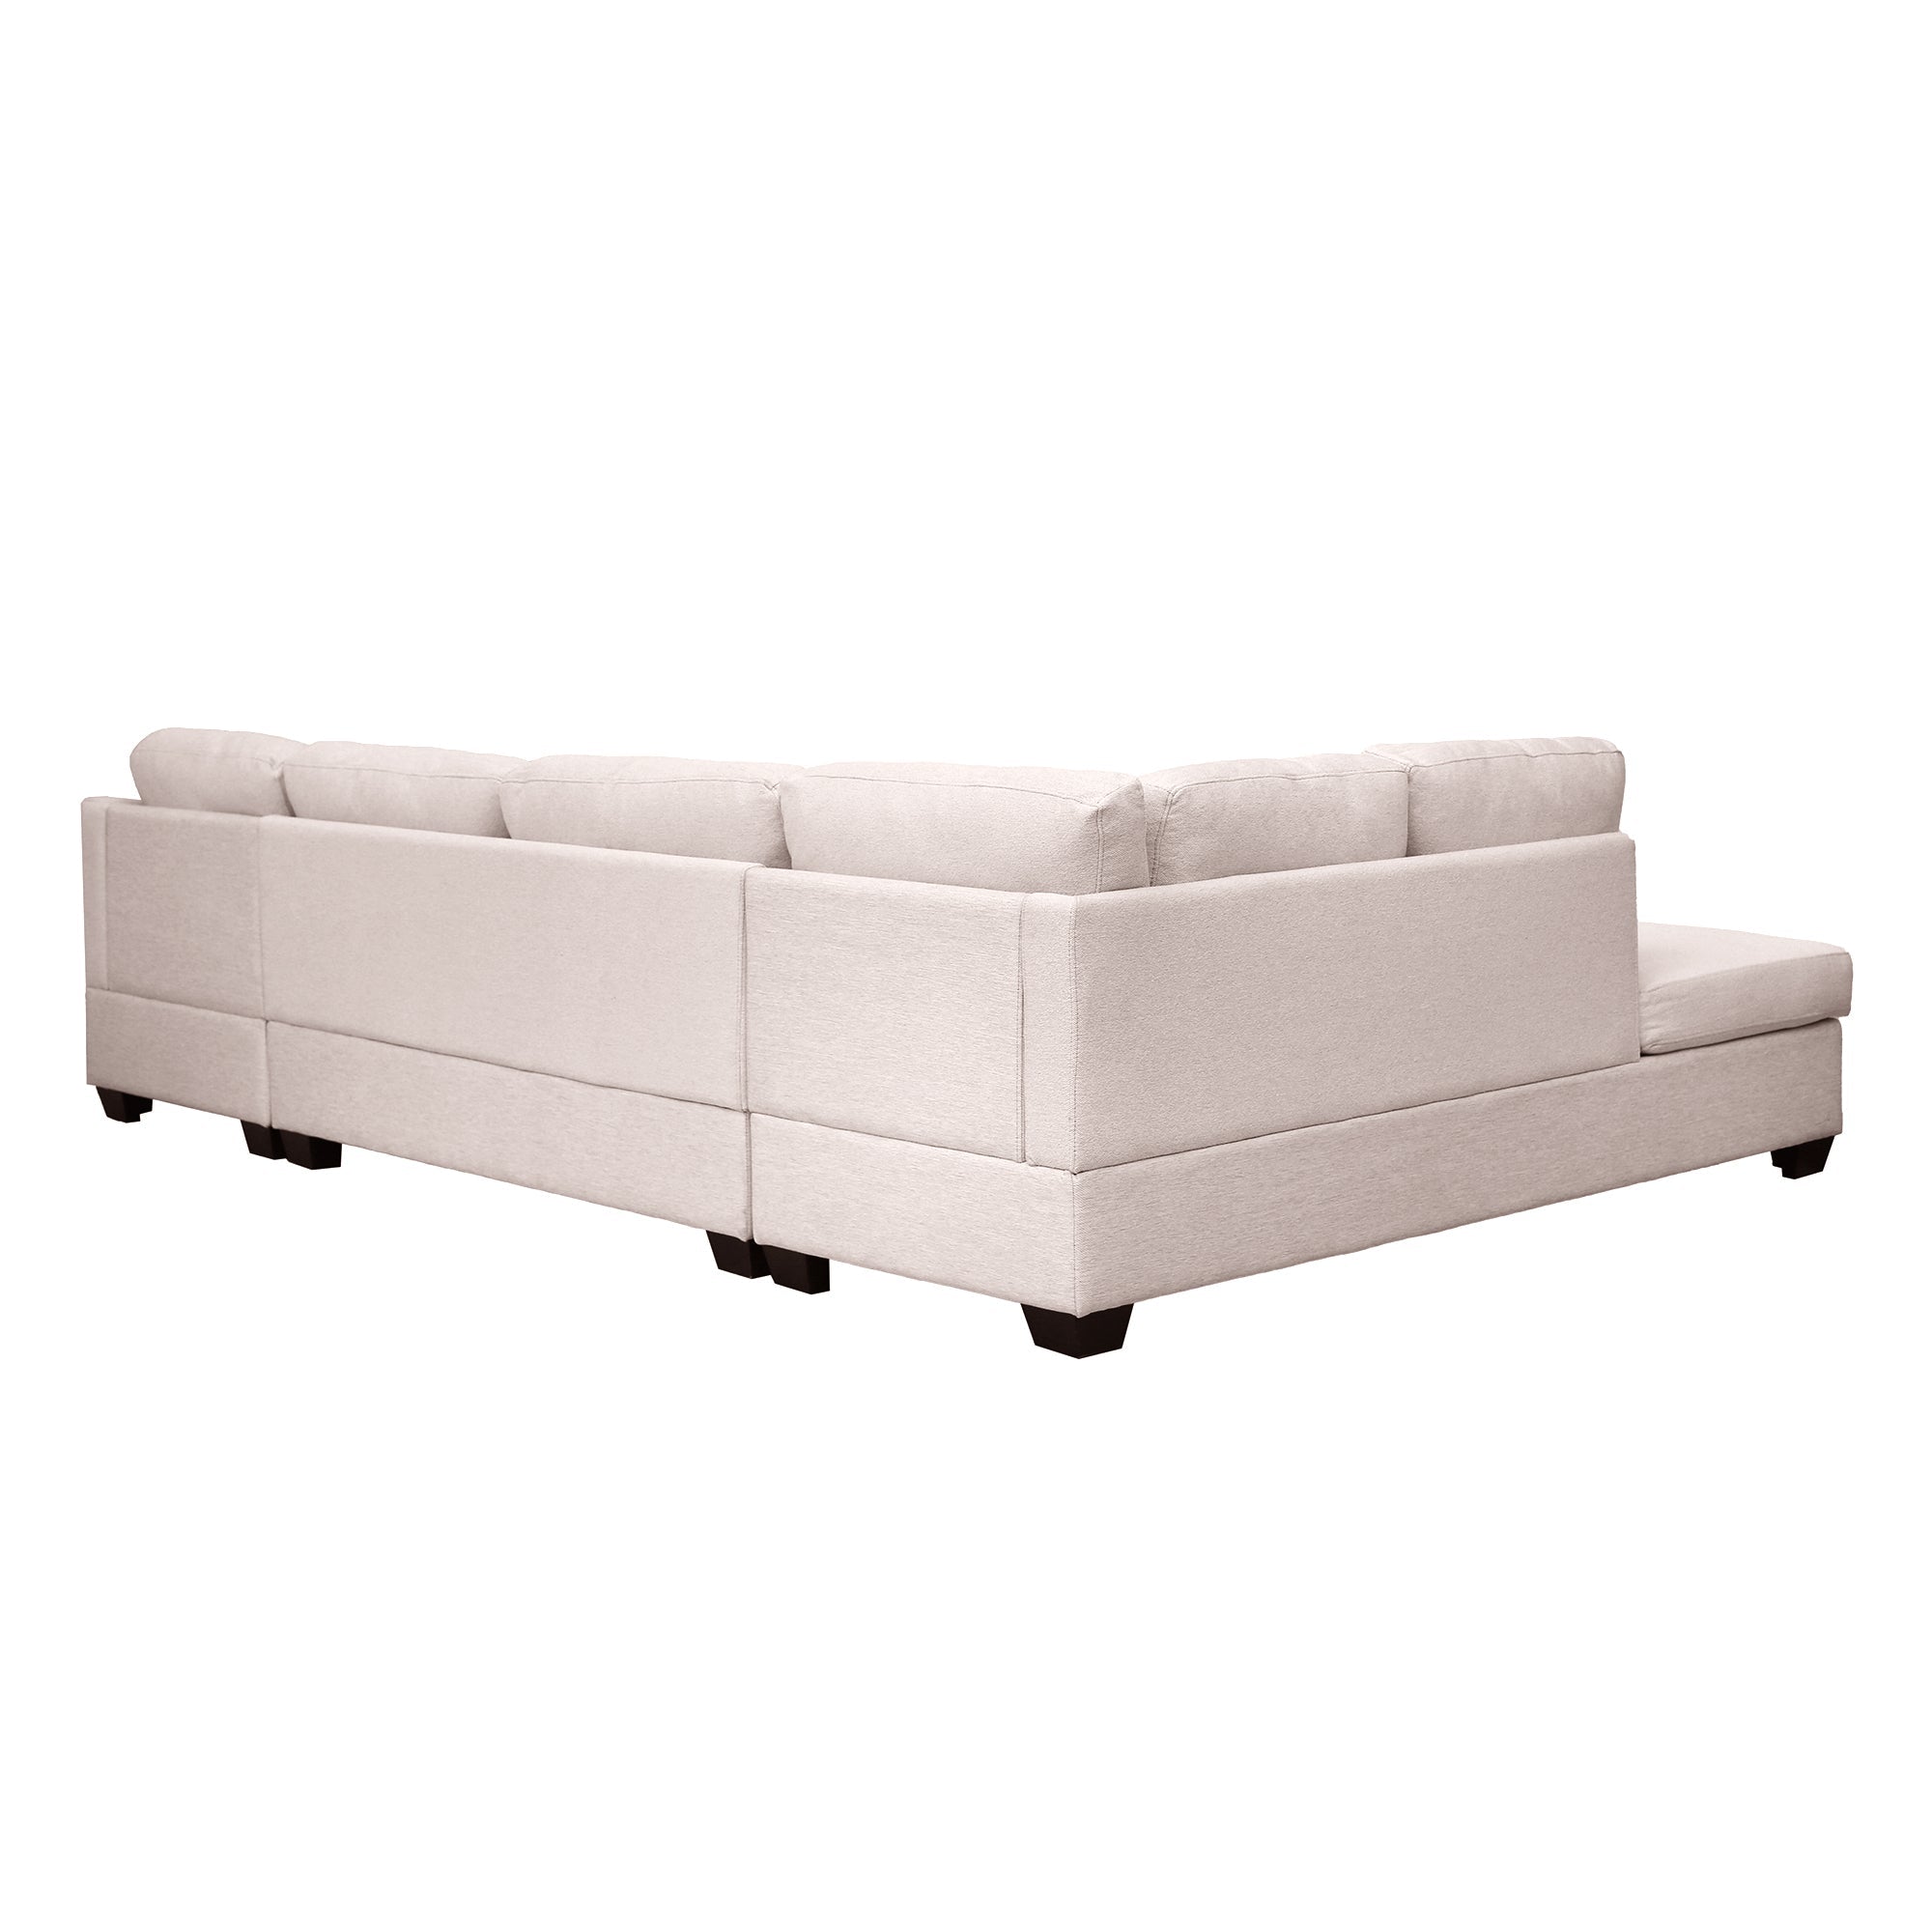 Beige Modern U-Shape Sectional Sofa - Double Chaise-Stationary Sectionals-American Furniture Outlet